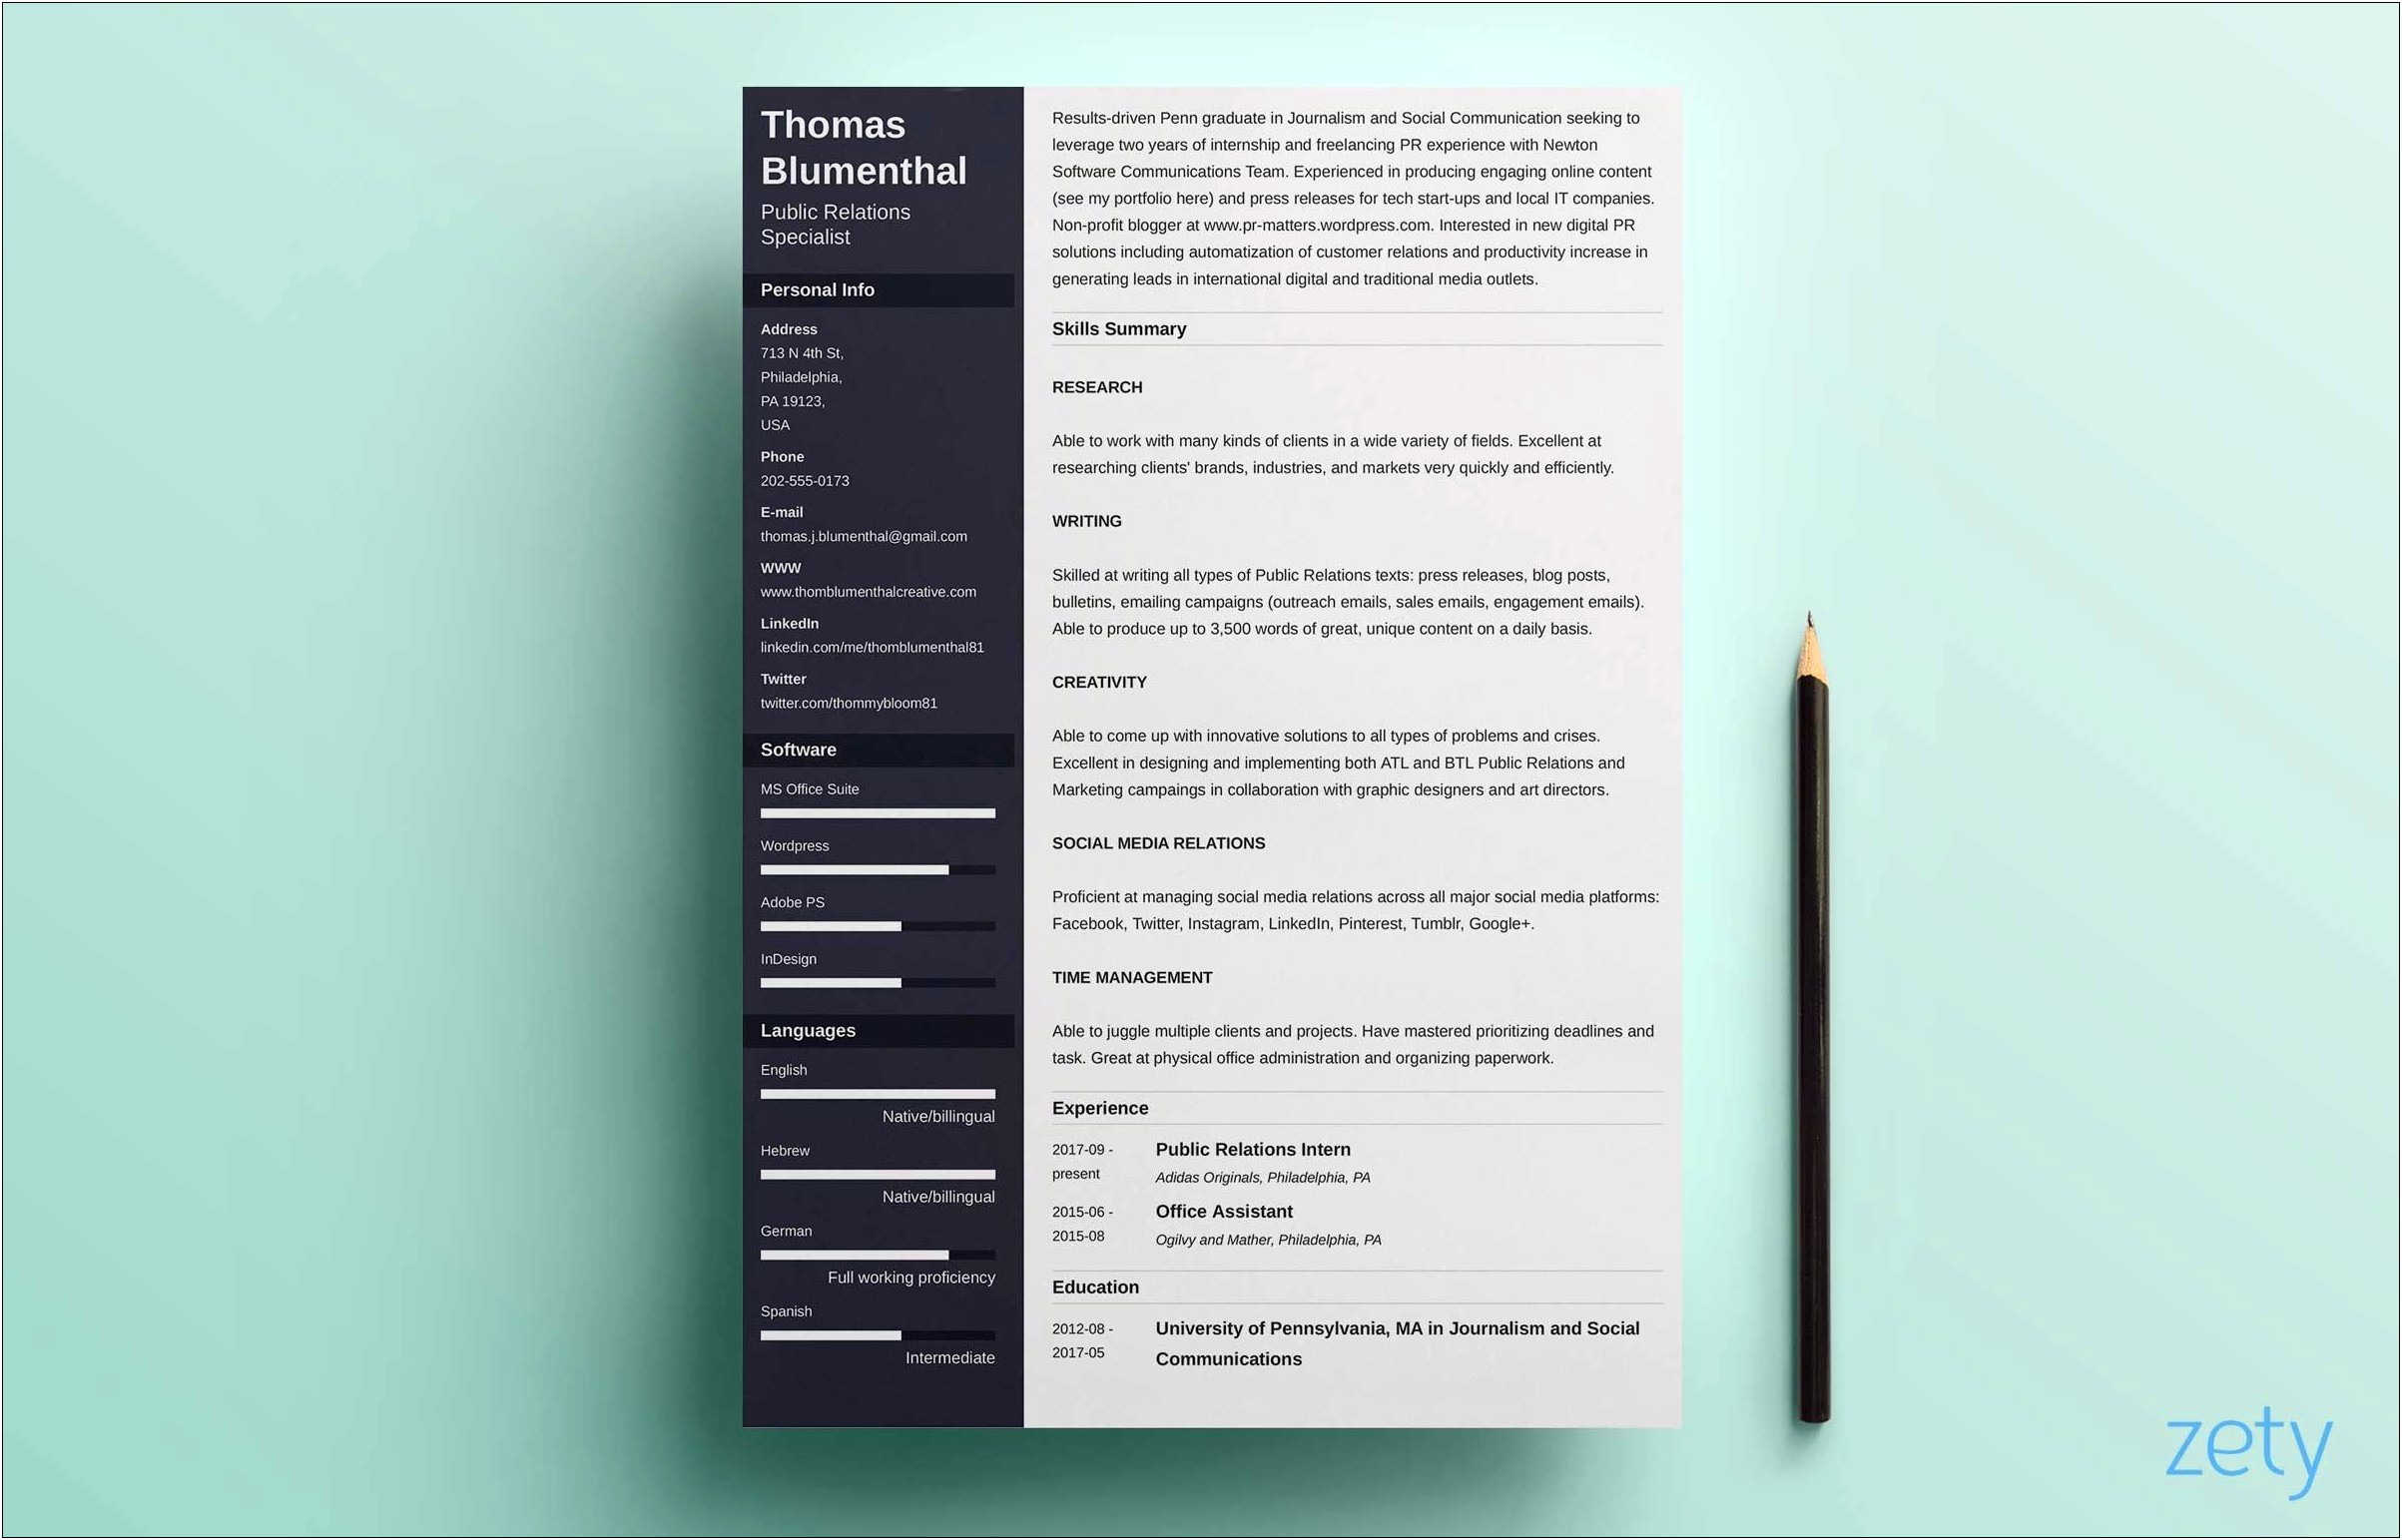 Functional Resume Template 2018 Free Download